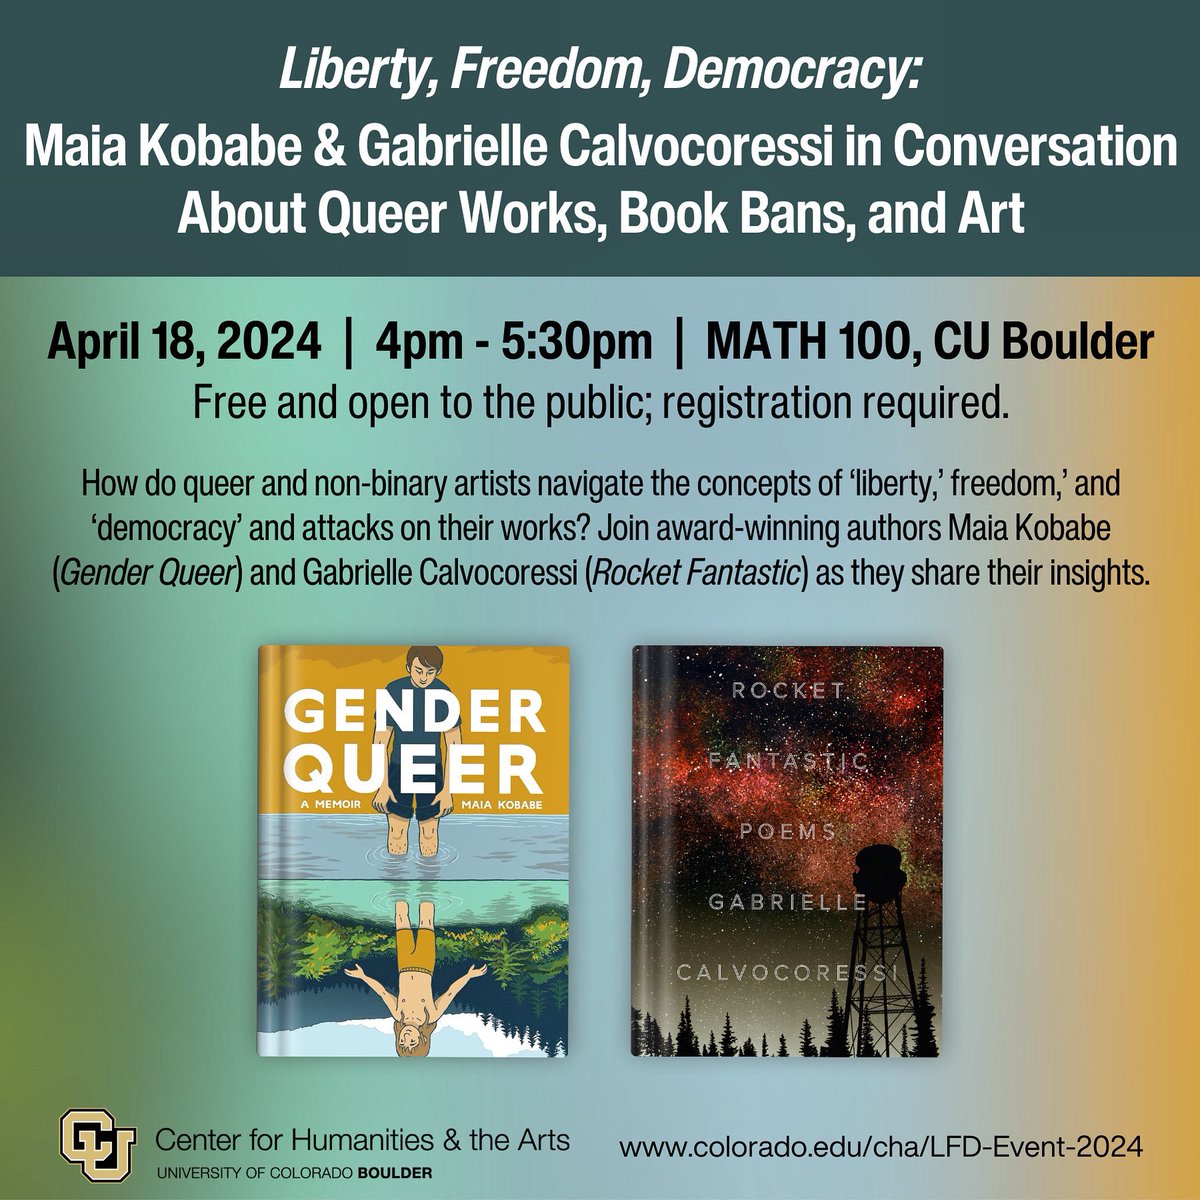 Maia Kobabe & Gabrielle Calvocoressi (@rocketfantastic) in Conversation - Queer Works, Book Bans, & Art Thursday, April 18 | @CUBoulder | 4pm - 5:30pm Learn what ‘liberty’, ‘freedom’, and ‘democracy’ mean for our speakers as non-binary artists. RSVP: web.cvent.com/event/3d98c083…